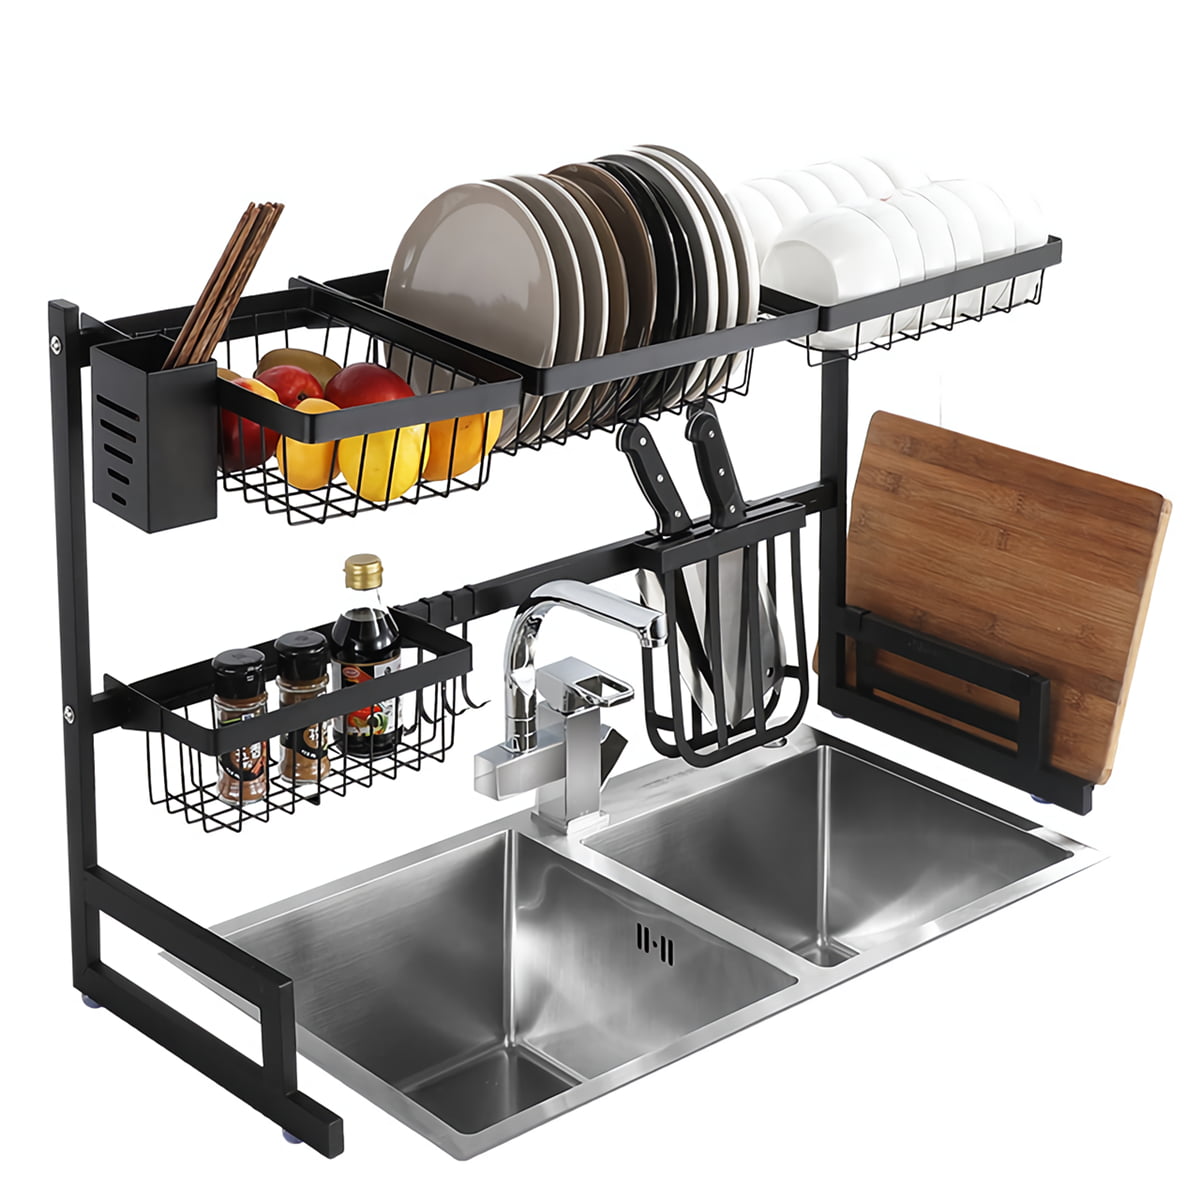 Details about   2-Tier Dish Drying Rack Stainless Steel Drainer Kitchen Storage Space Saver NEW 